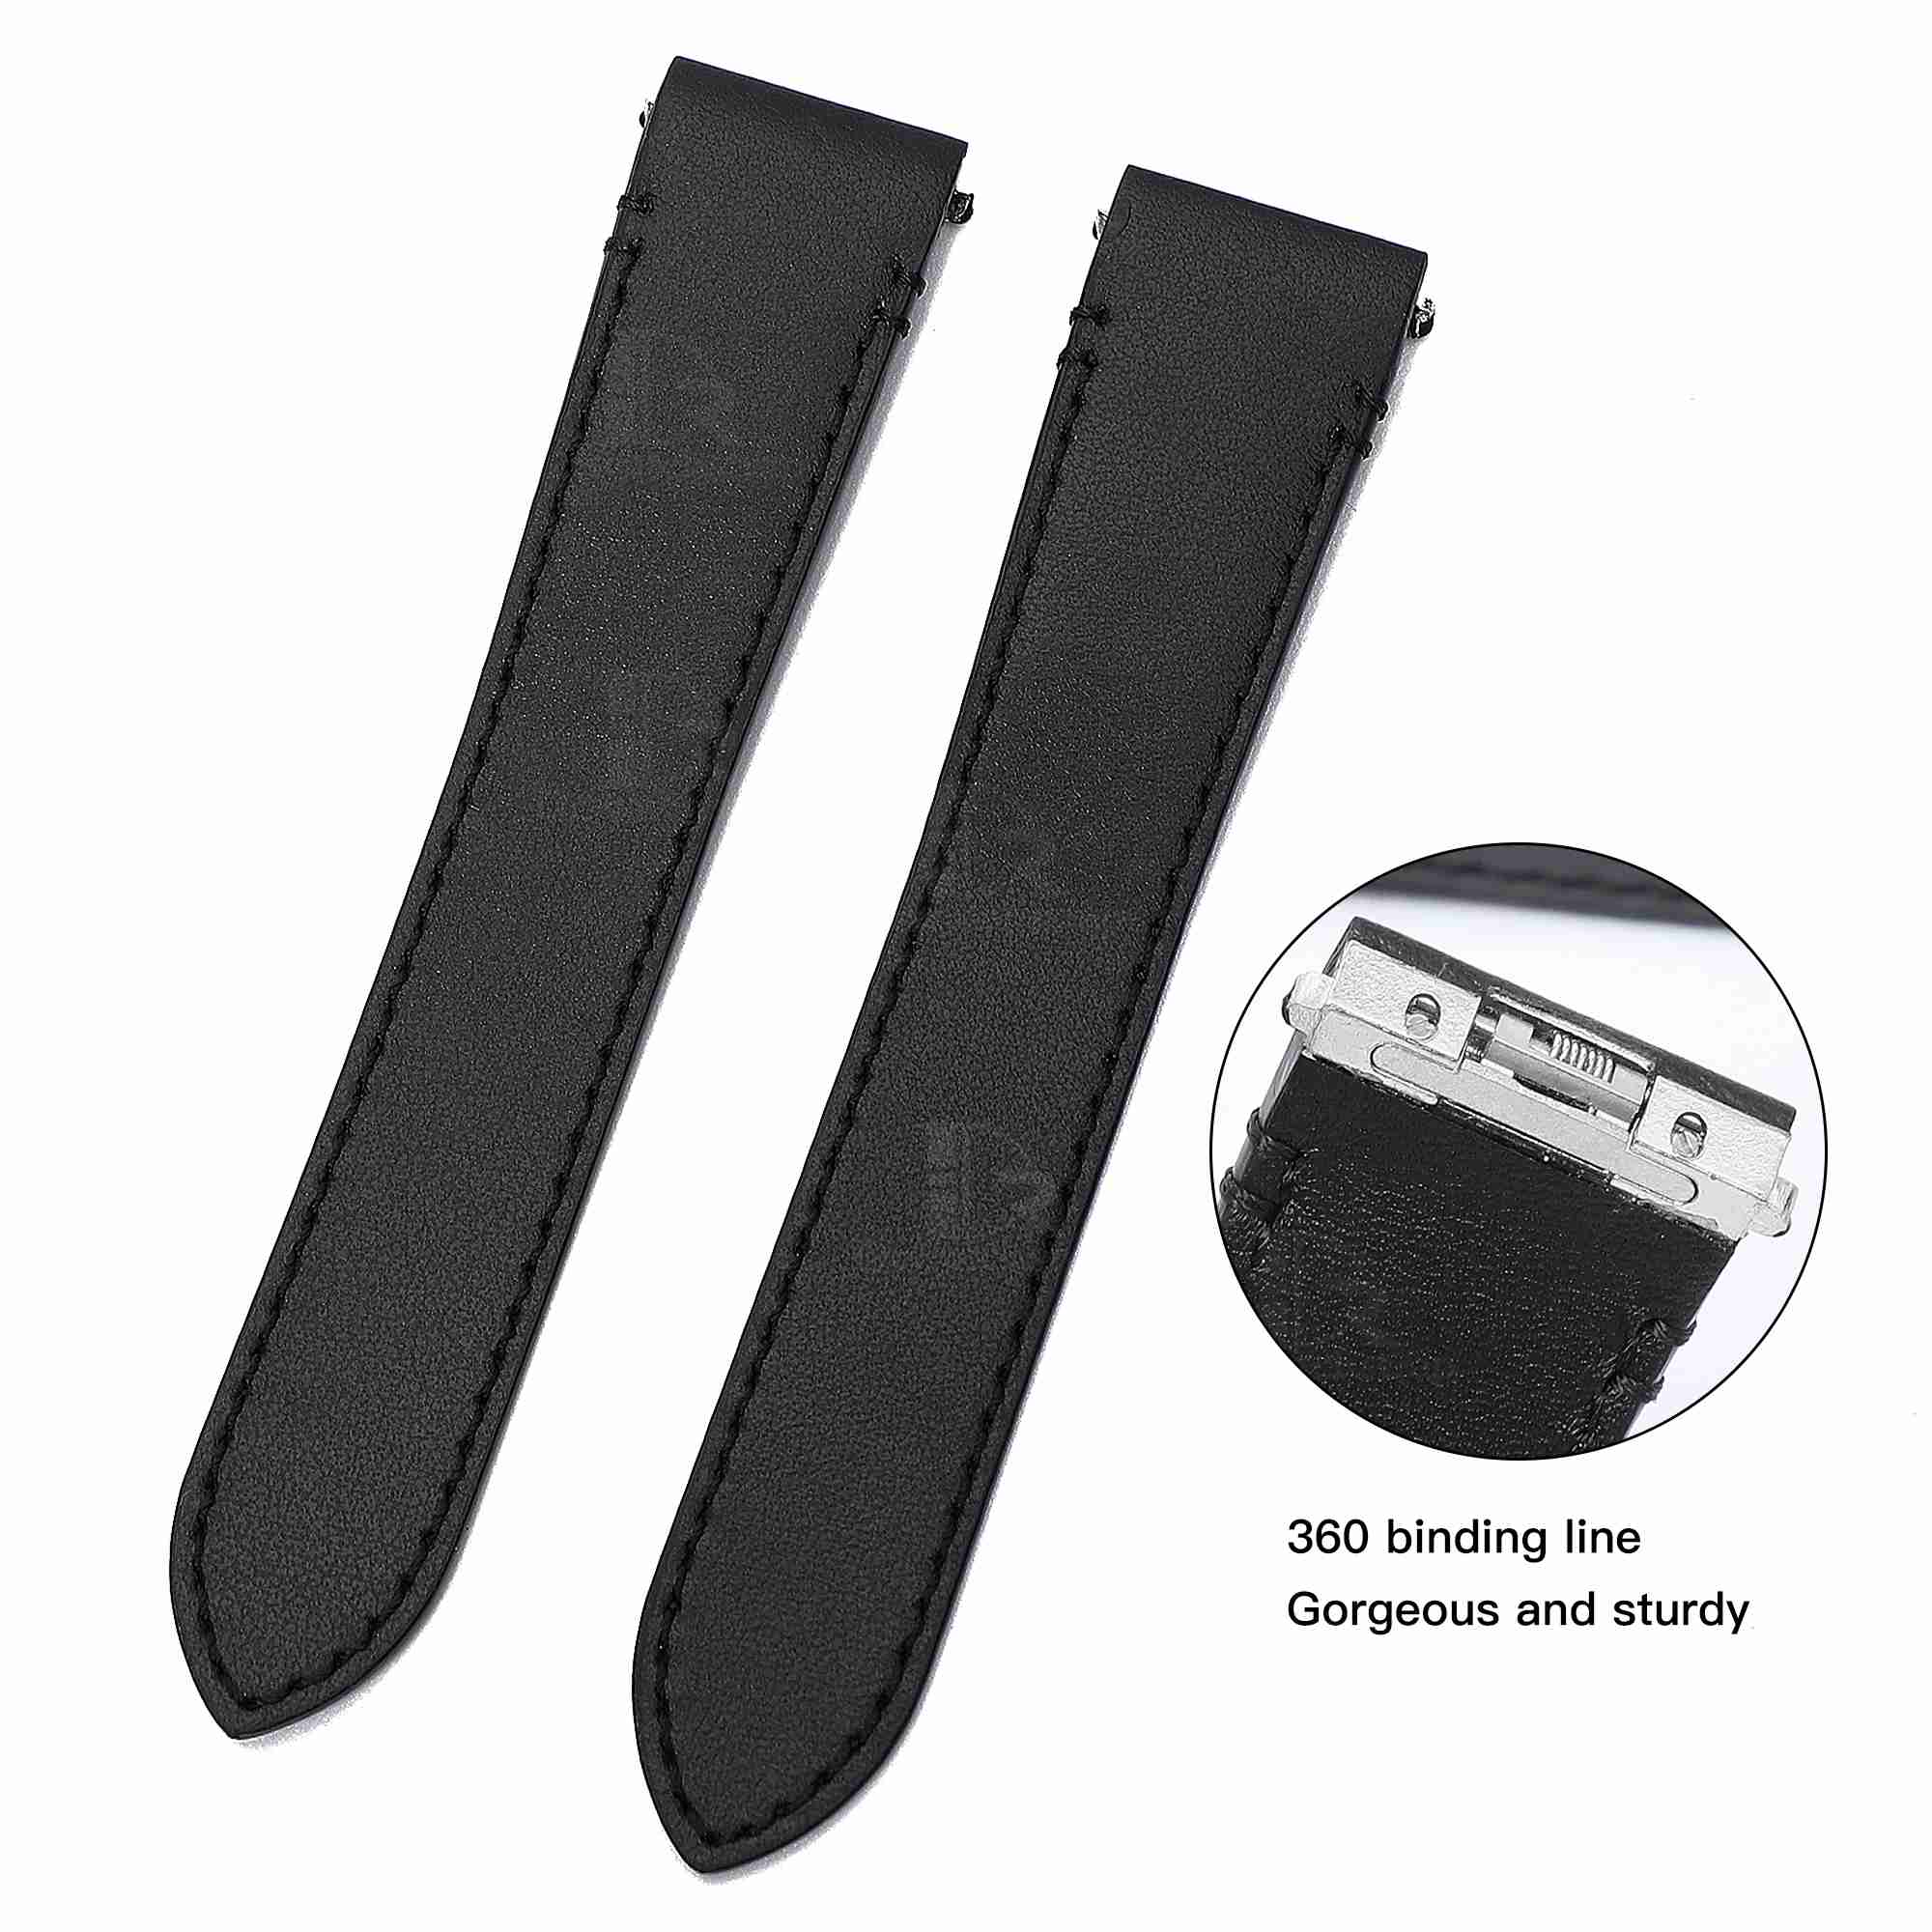 Premium Quick release calfskin Cartier Santos quickswitch black leather watch strap & watch band replacement with an interchangeable system for men's women's Cartier Santos Larga Medium watches for sale - Shop the best quality Santos de Cartier straps and watchbands at a low price